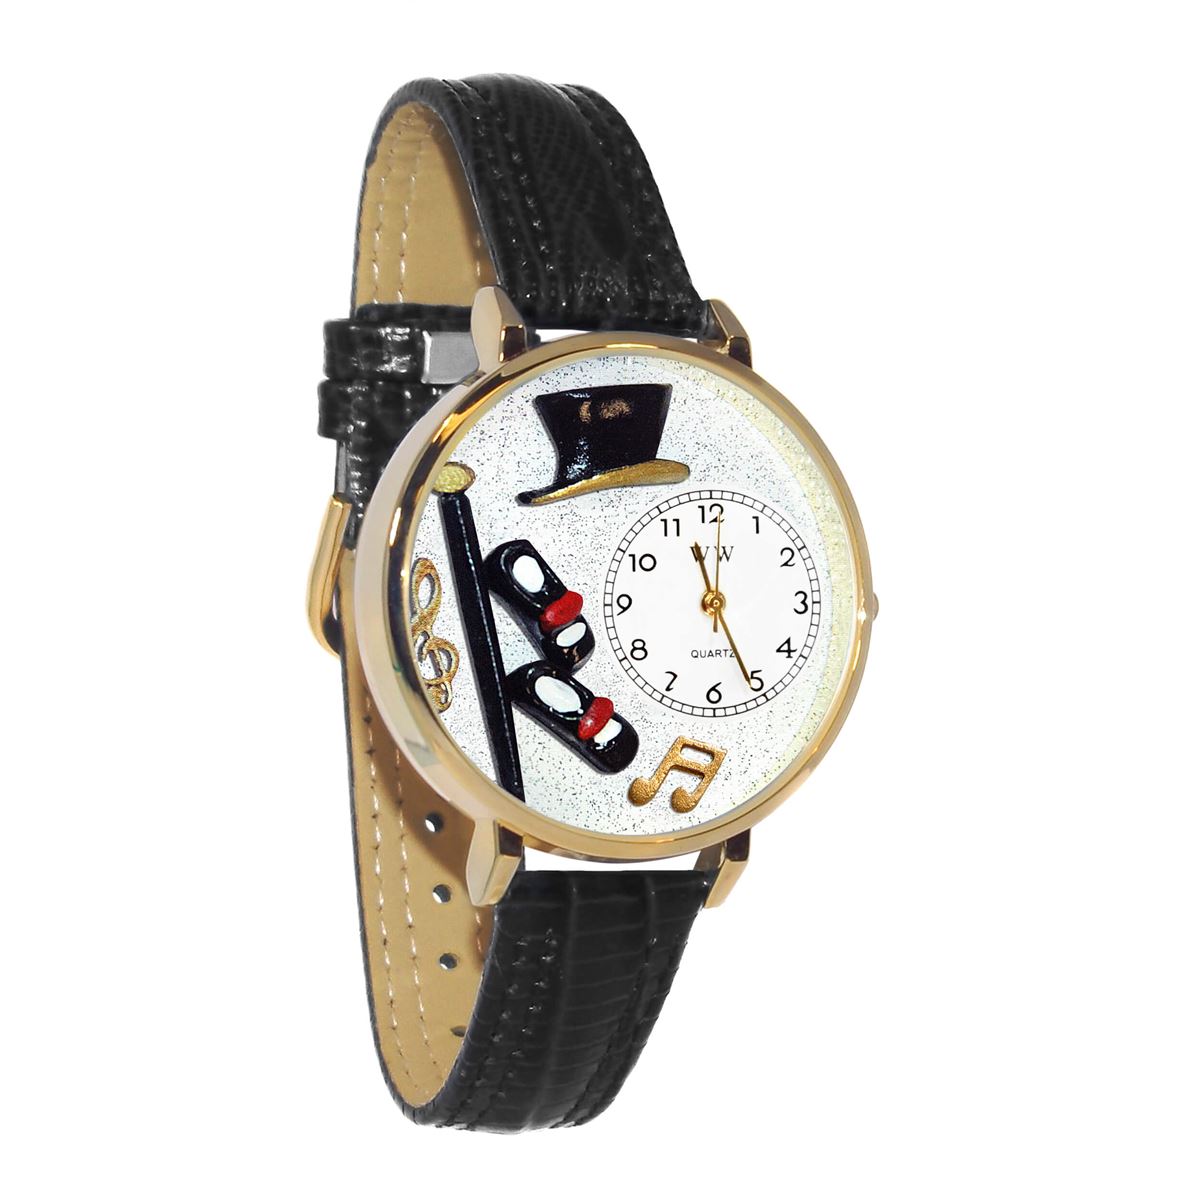 Whimsical Gifts | Tap Dancing 3D Watch Large Style | Handmade in USA | Hobbies & Special Interests | Arts & Performance | Novelty Unique Fun Miniatures Gift | Gold Finish Black Leather Watch Band